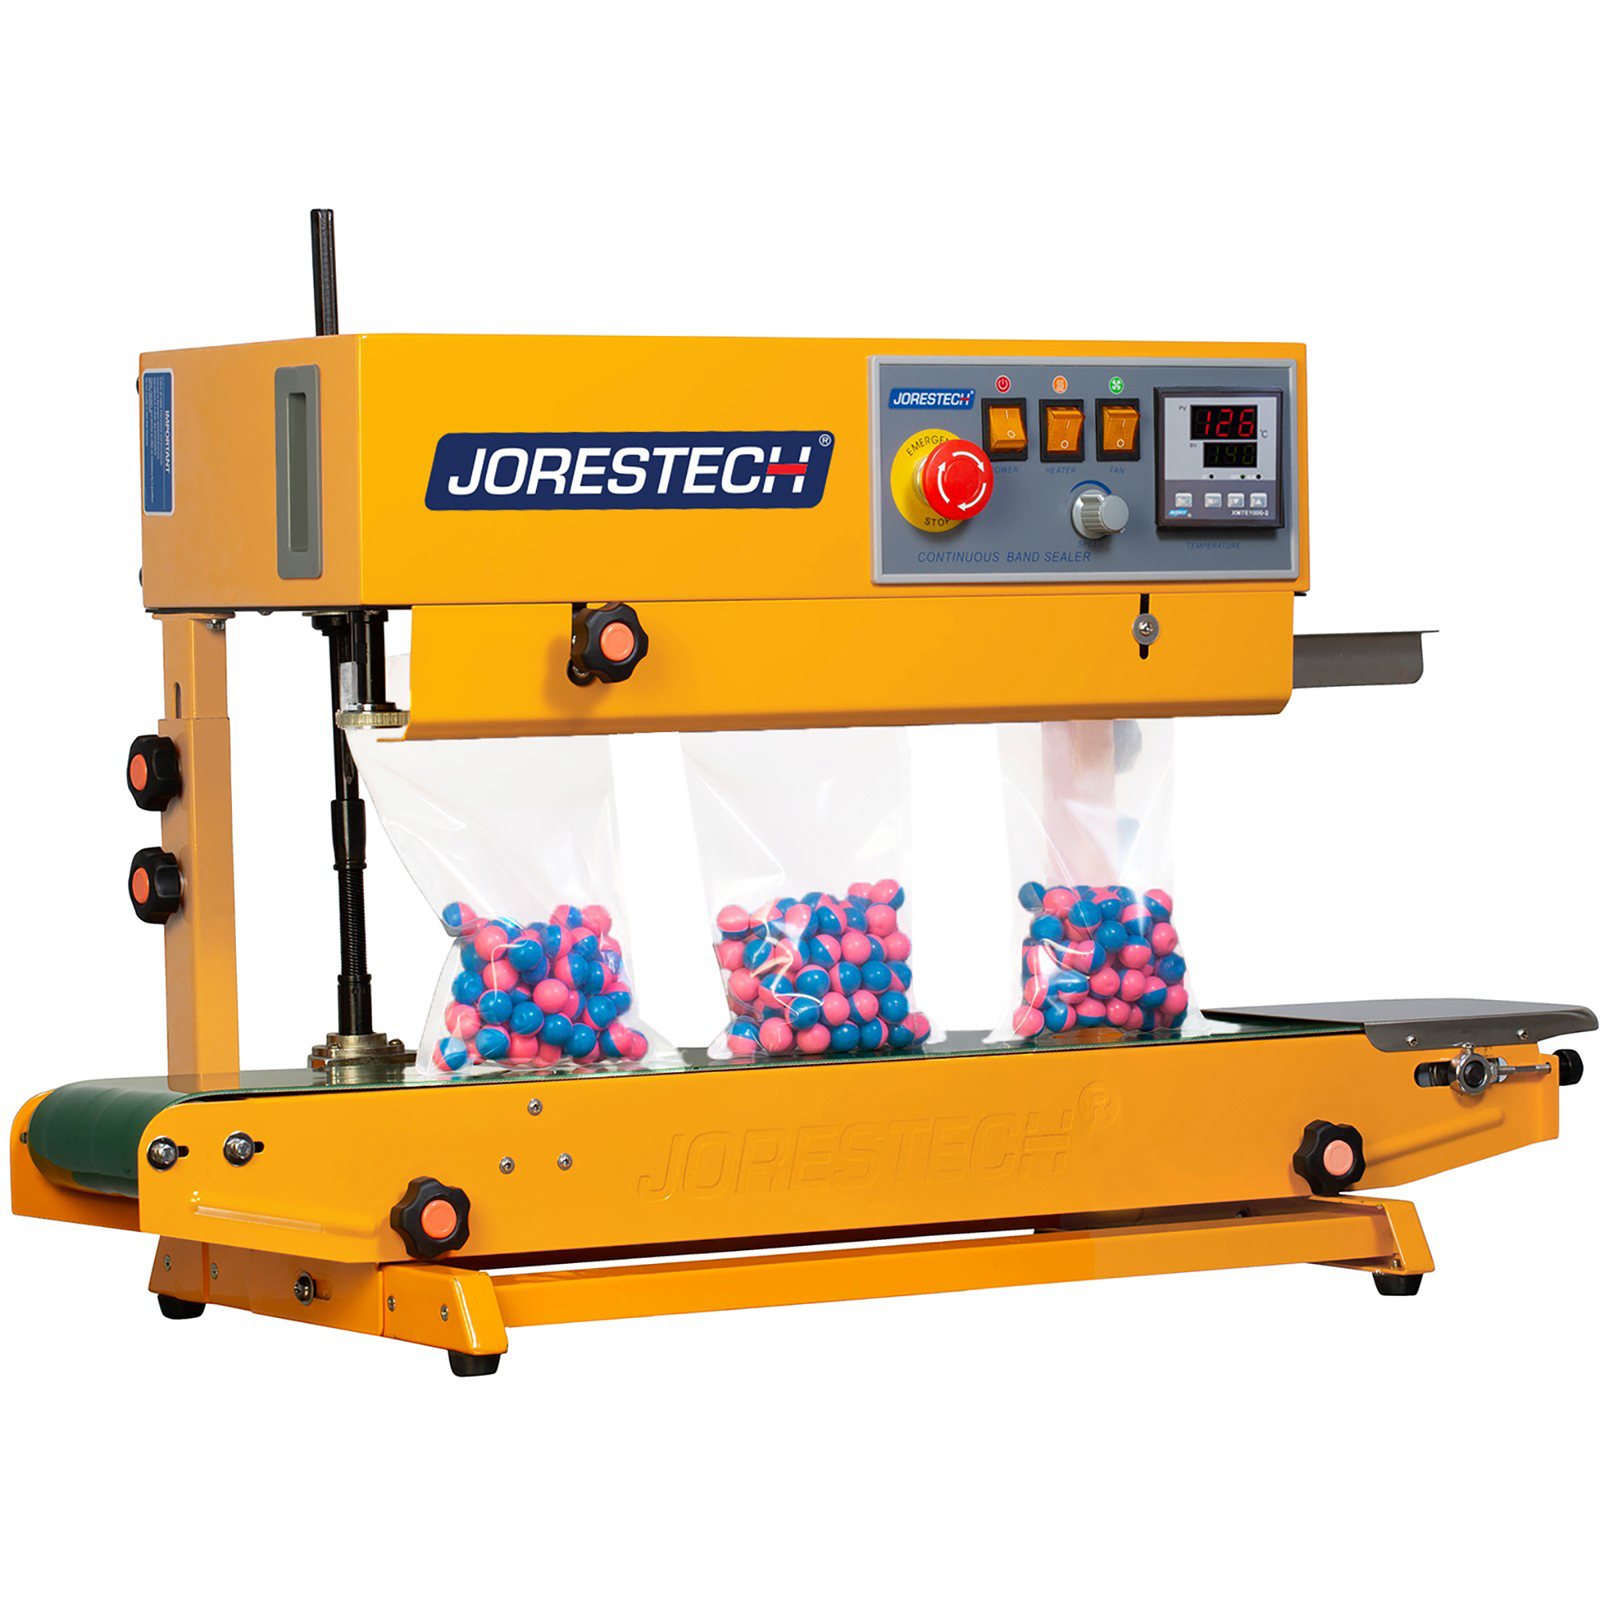 Diagonal view of the yellow JORES TECHNOLOGIES® horizontal continuous band sealer shown sealing 3 clear sealable bags filled with pink and blue paint balls.  Control panel can also be seen with digital temperature control, the red emergency stop button and other switches